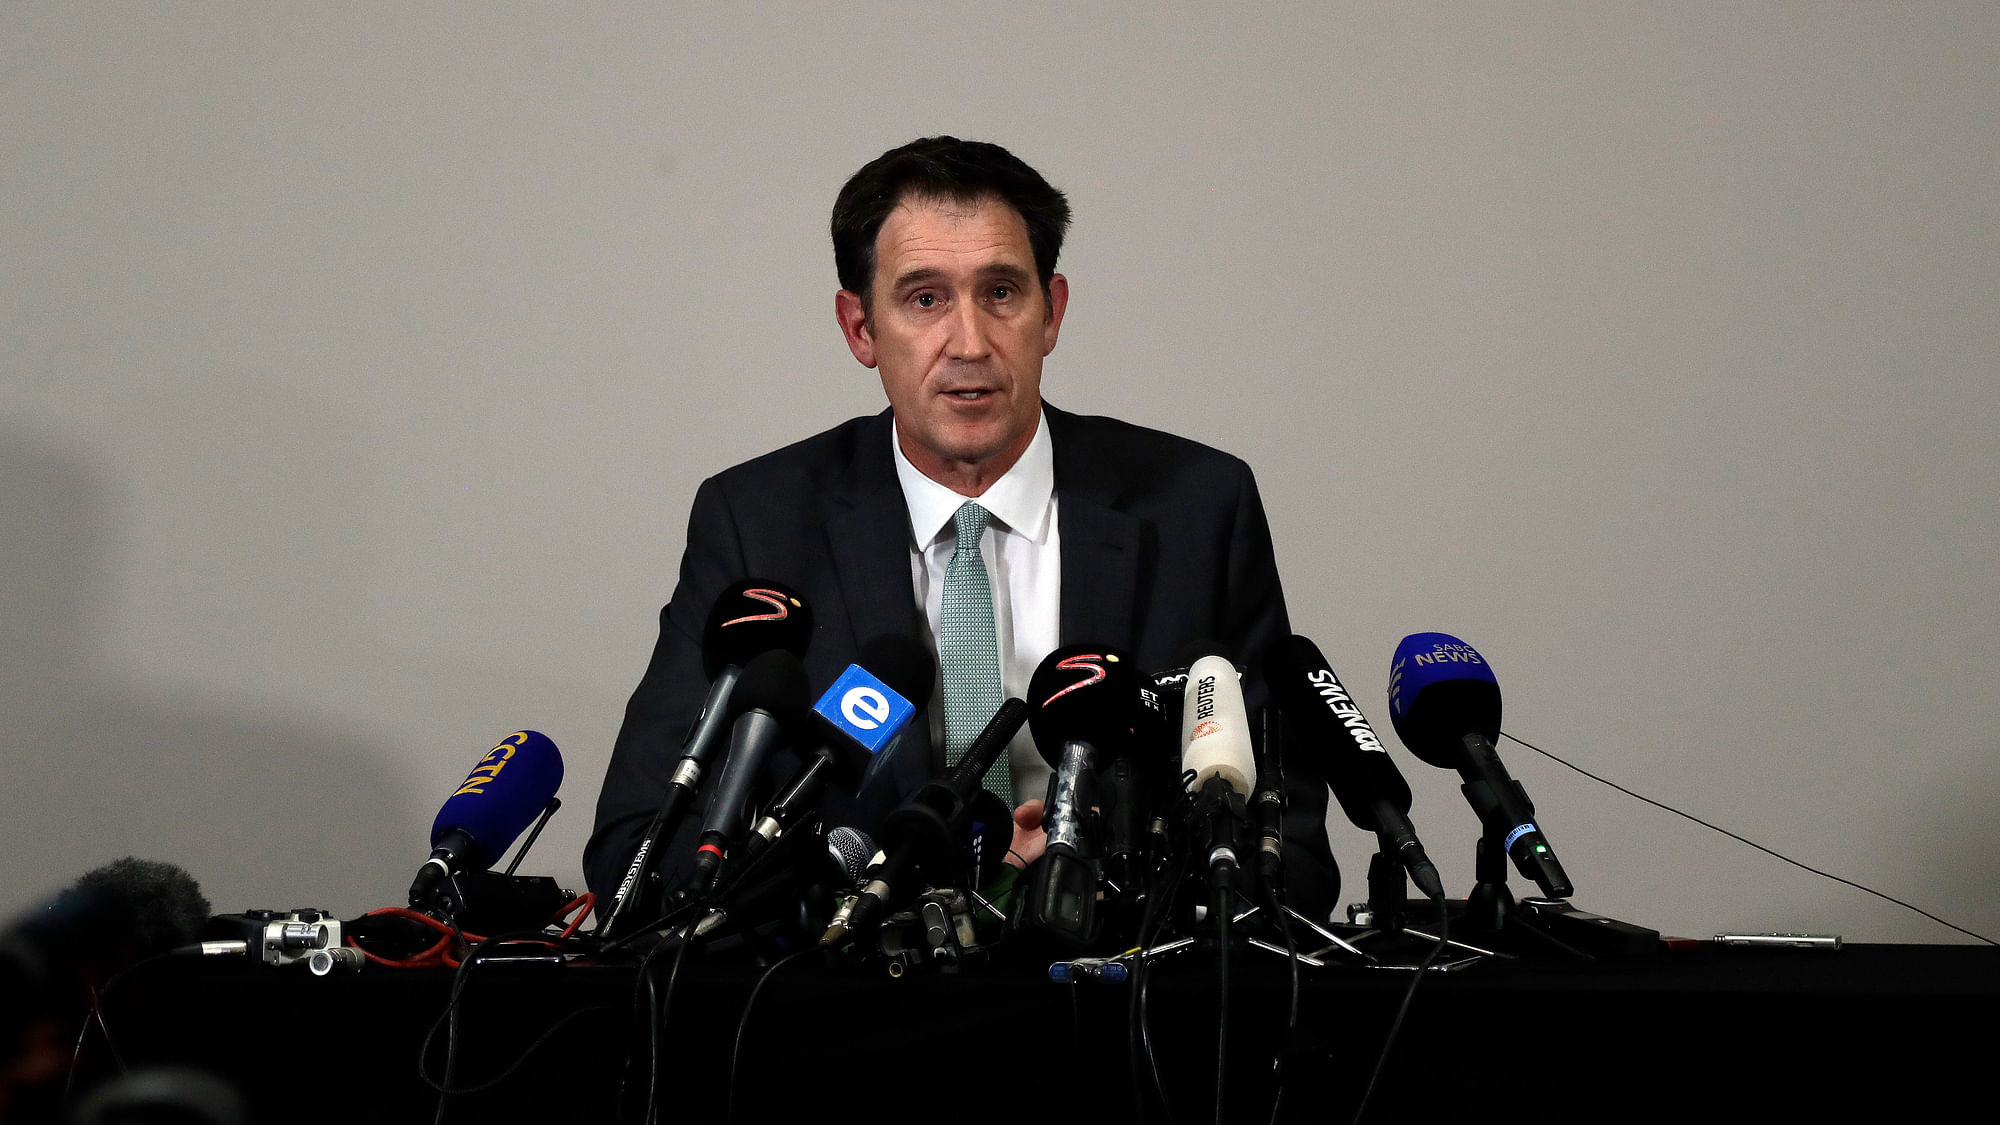 James Sutherland, chief executive of Cricket Australia, speaks during a media conference in Johannesburg, South Africa, Tuesday, March 27, 2018. Australia cricket captain Steve Smith, vice-captain David Warner and batsman Cameron Bancroft have all been sent home from the tour of South Africa for their role in a cheating plot and face “significant sanctions” in the next 24 hours, James Sutherland announced Tuesday.&nbsp;